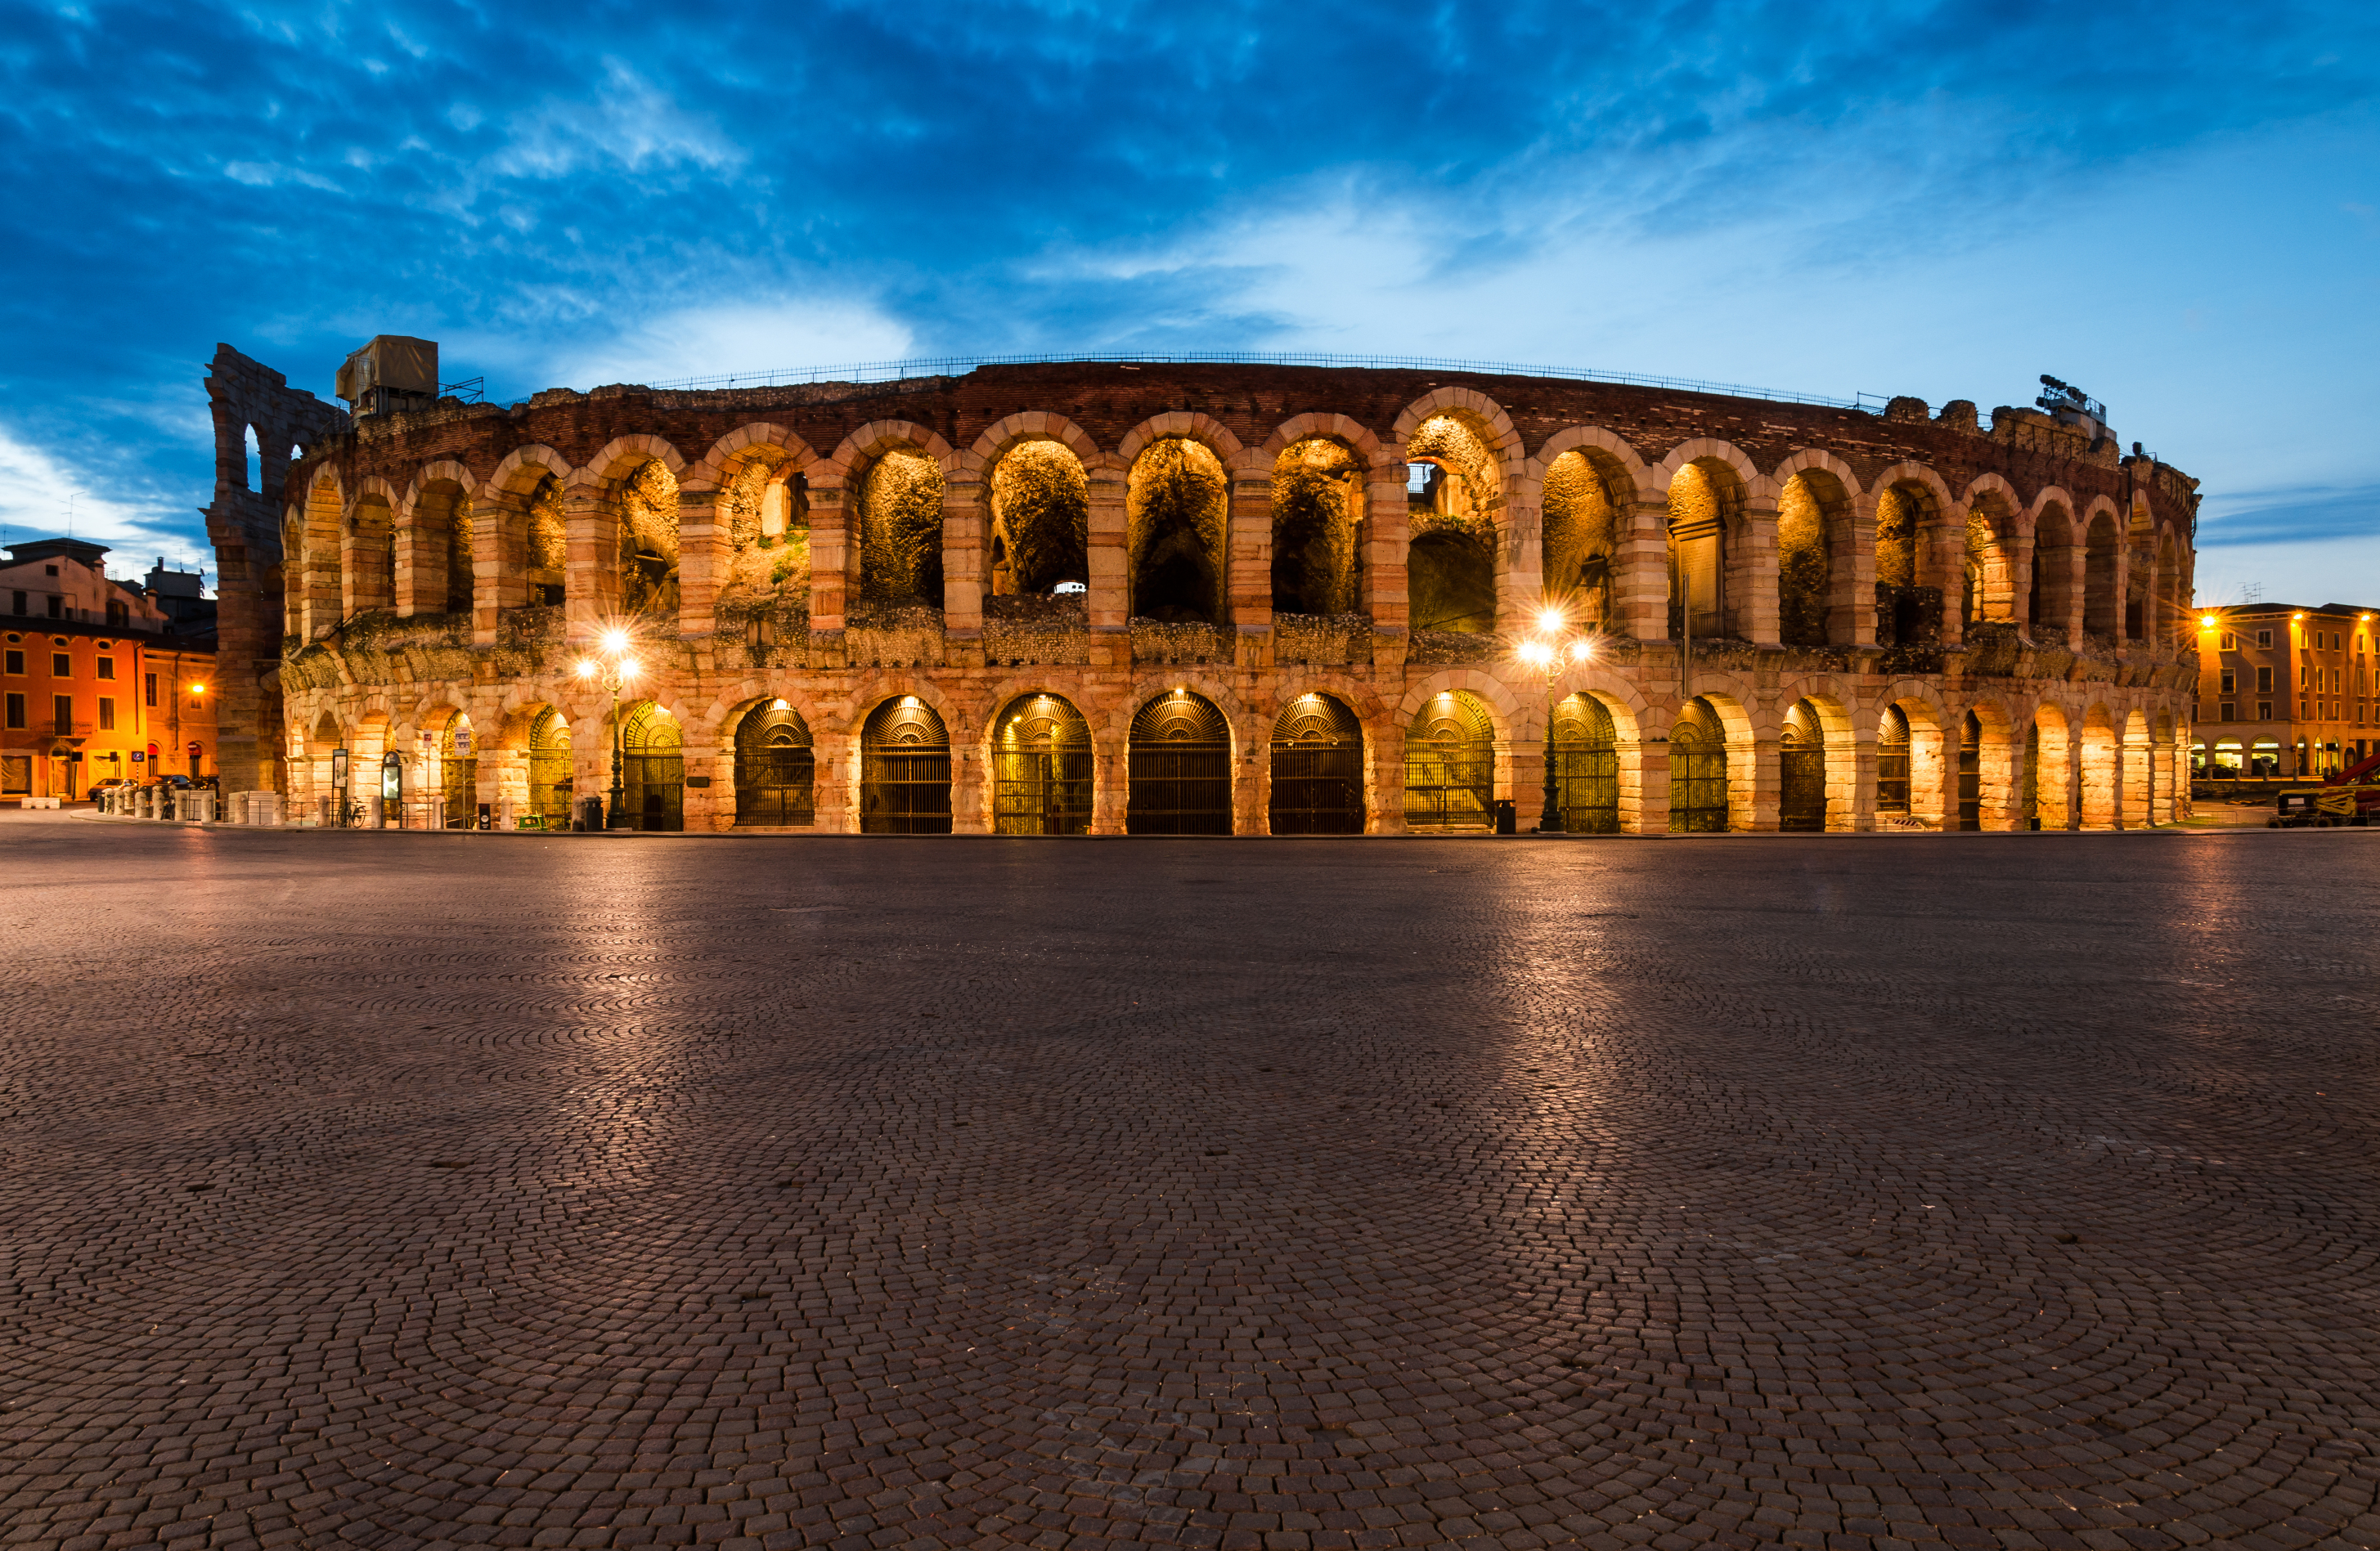 Guided tour of Verona through history and cuisine